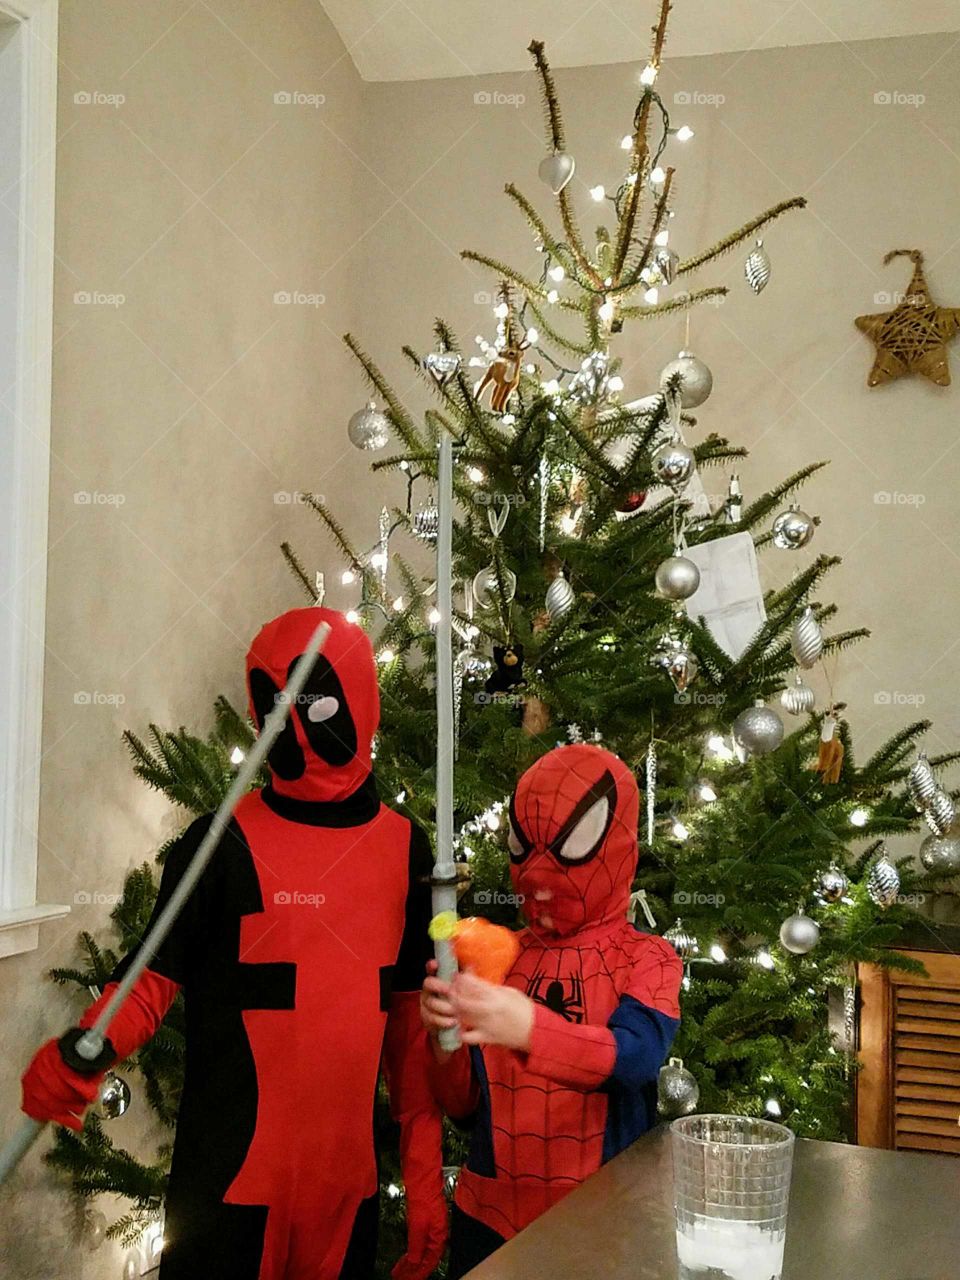 Costumes at Christmas time